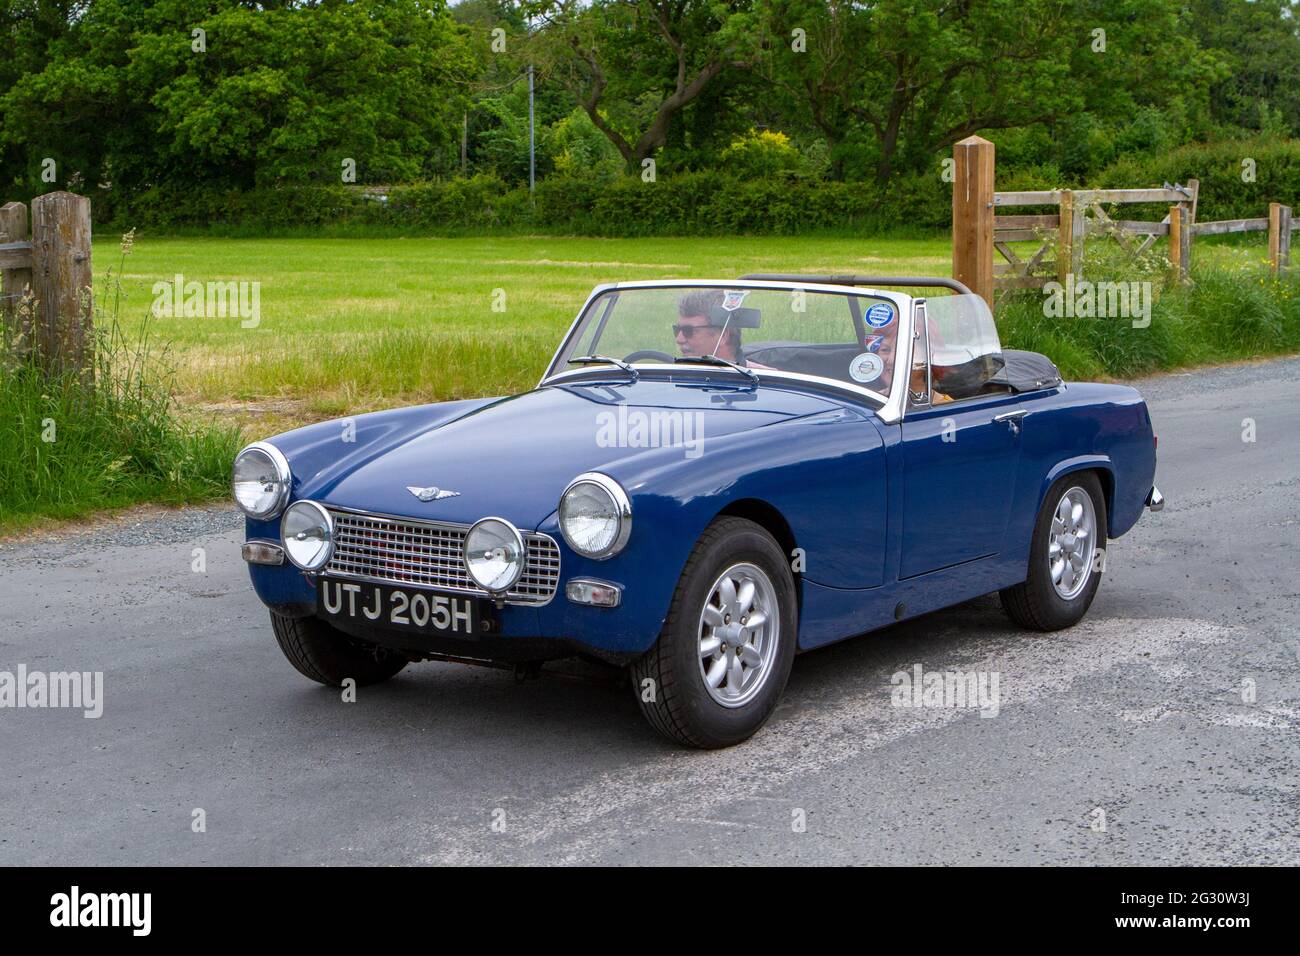 1970 blue Austin Healey Sprite at the 58th Annual Manchester to Blackpool Vintage & Classic Car Run The event is a ‘Touring Assembly’ Stock Photo